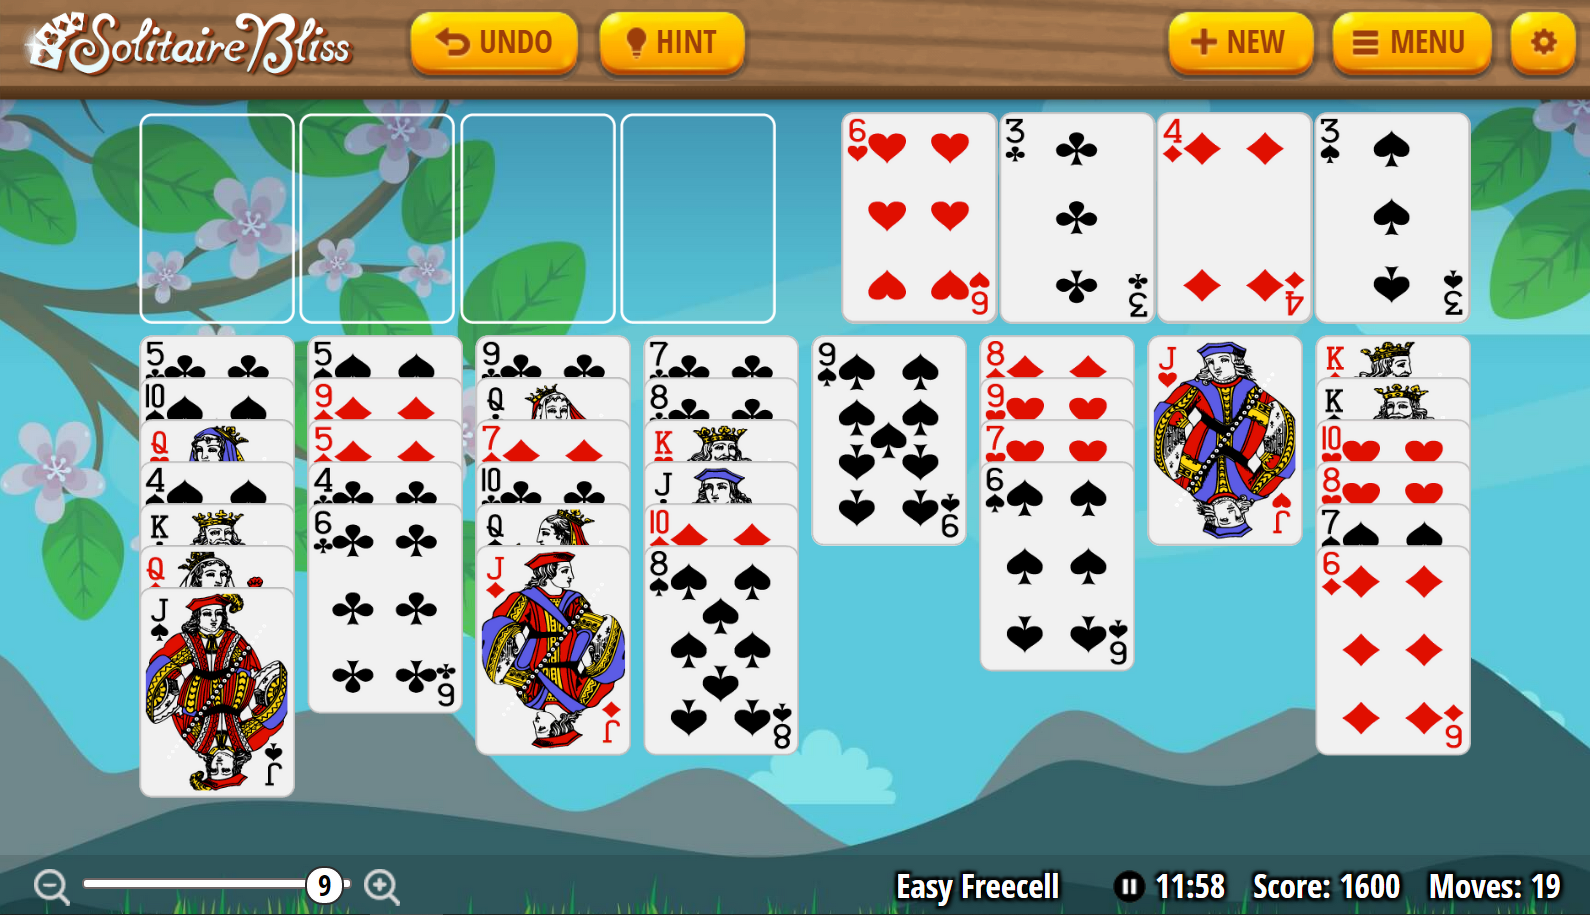 How to Play Freecell Solitaire? - TechSling Weblog